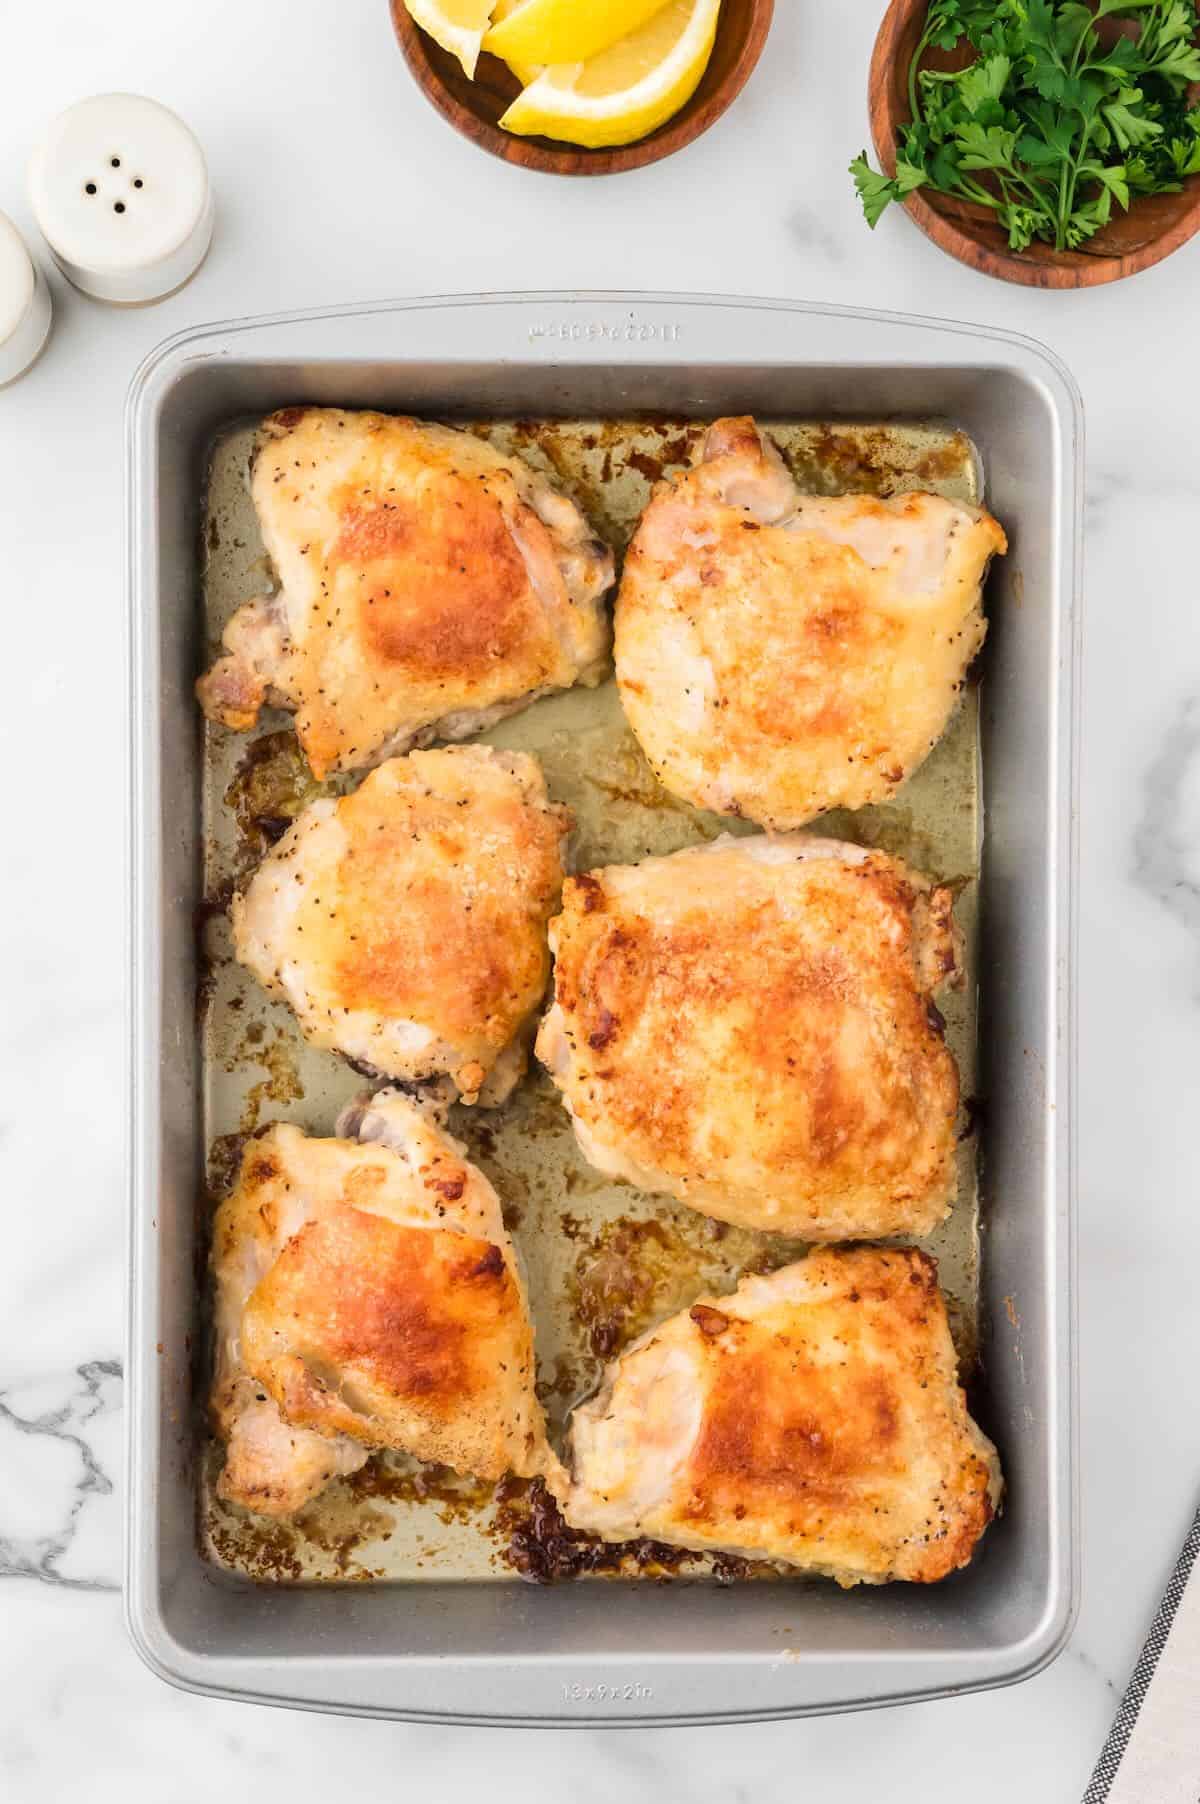 Chicken thighs with golden brown crispy skin in a baking pan.